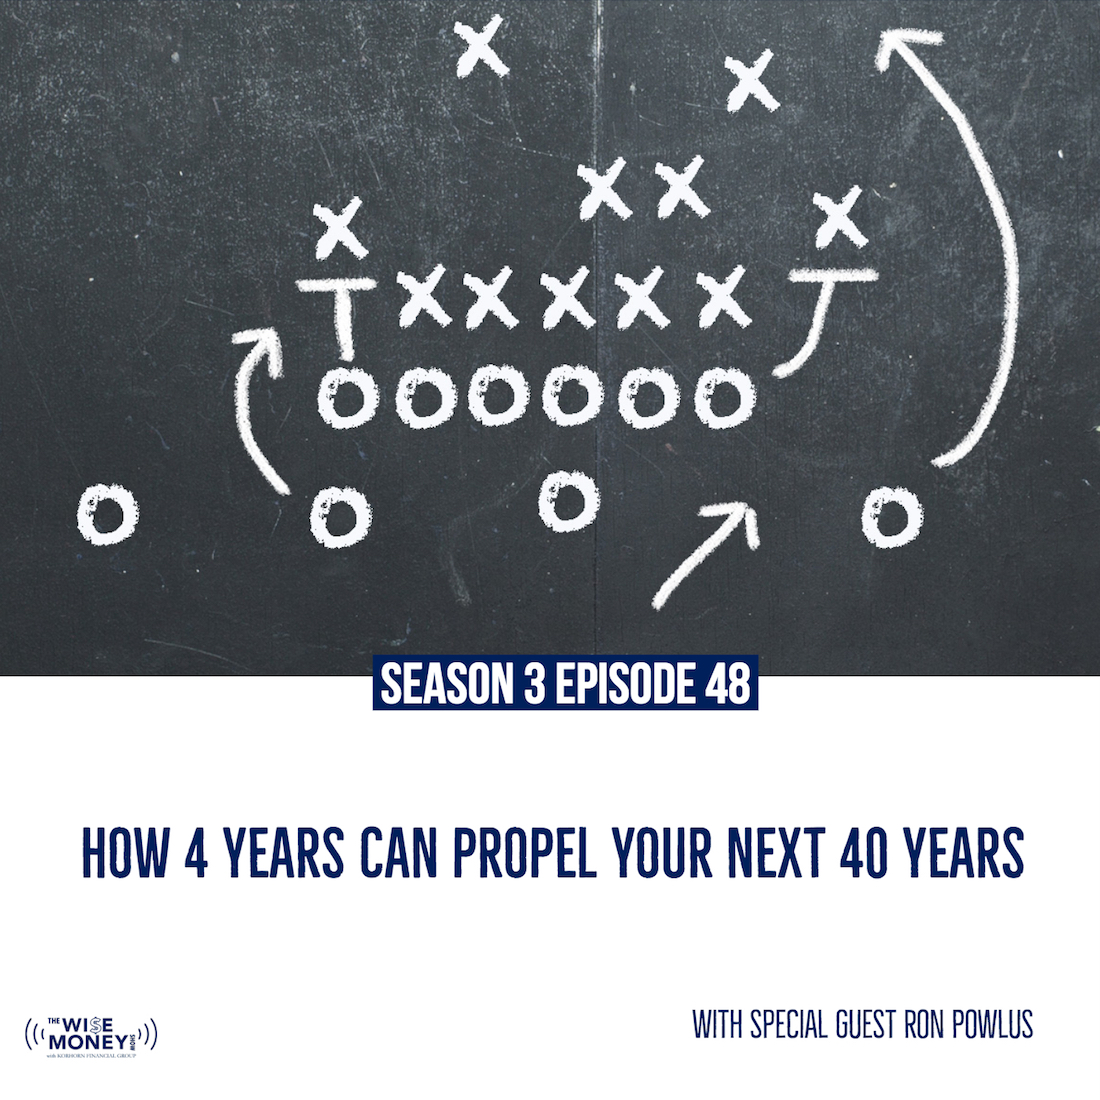 S3E48: How 4 Years Can Propel Your Next 40 Years